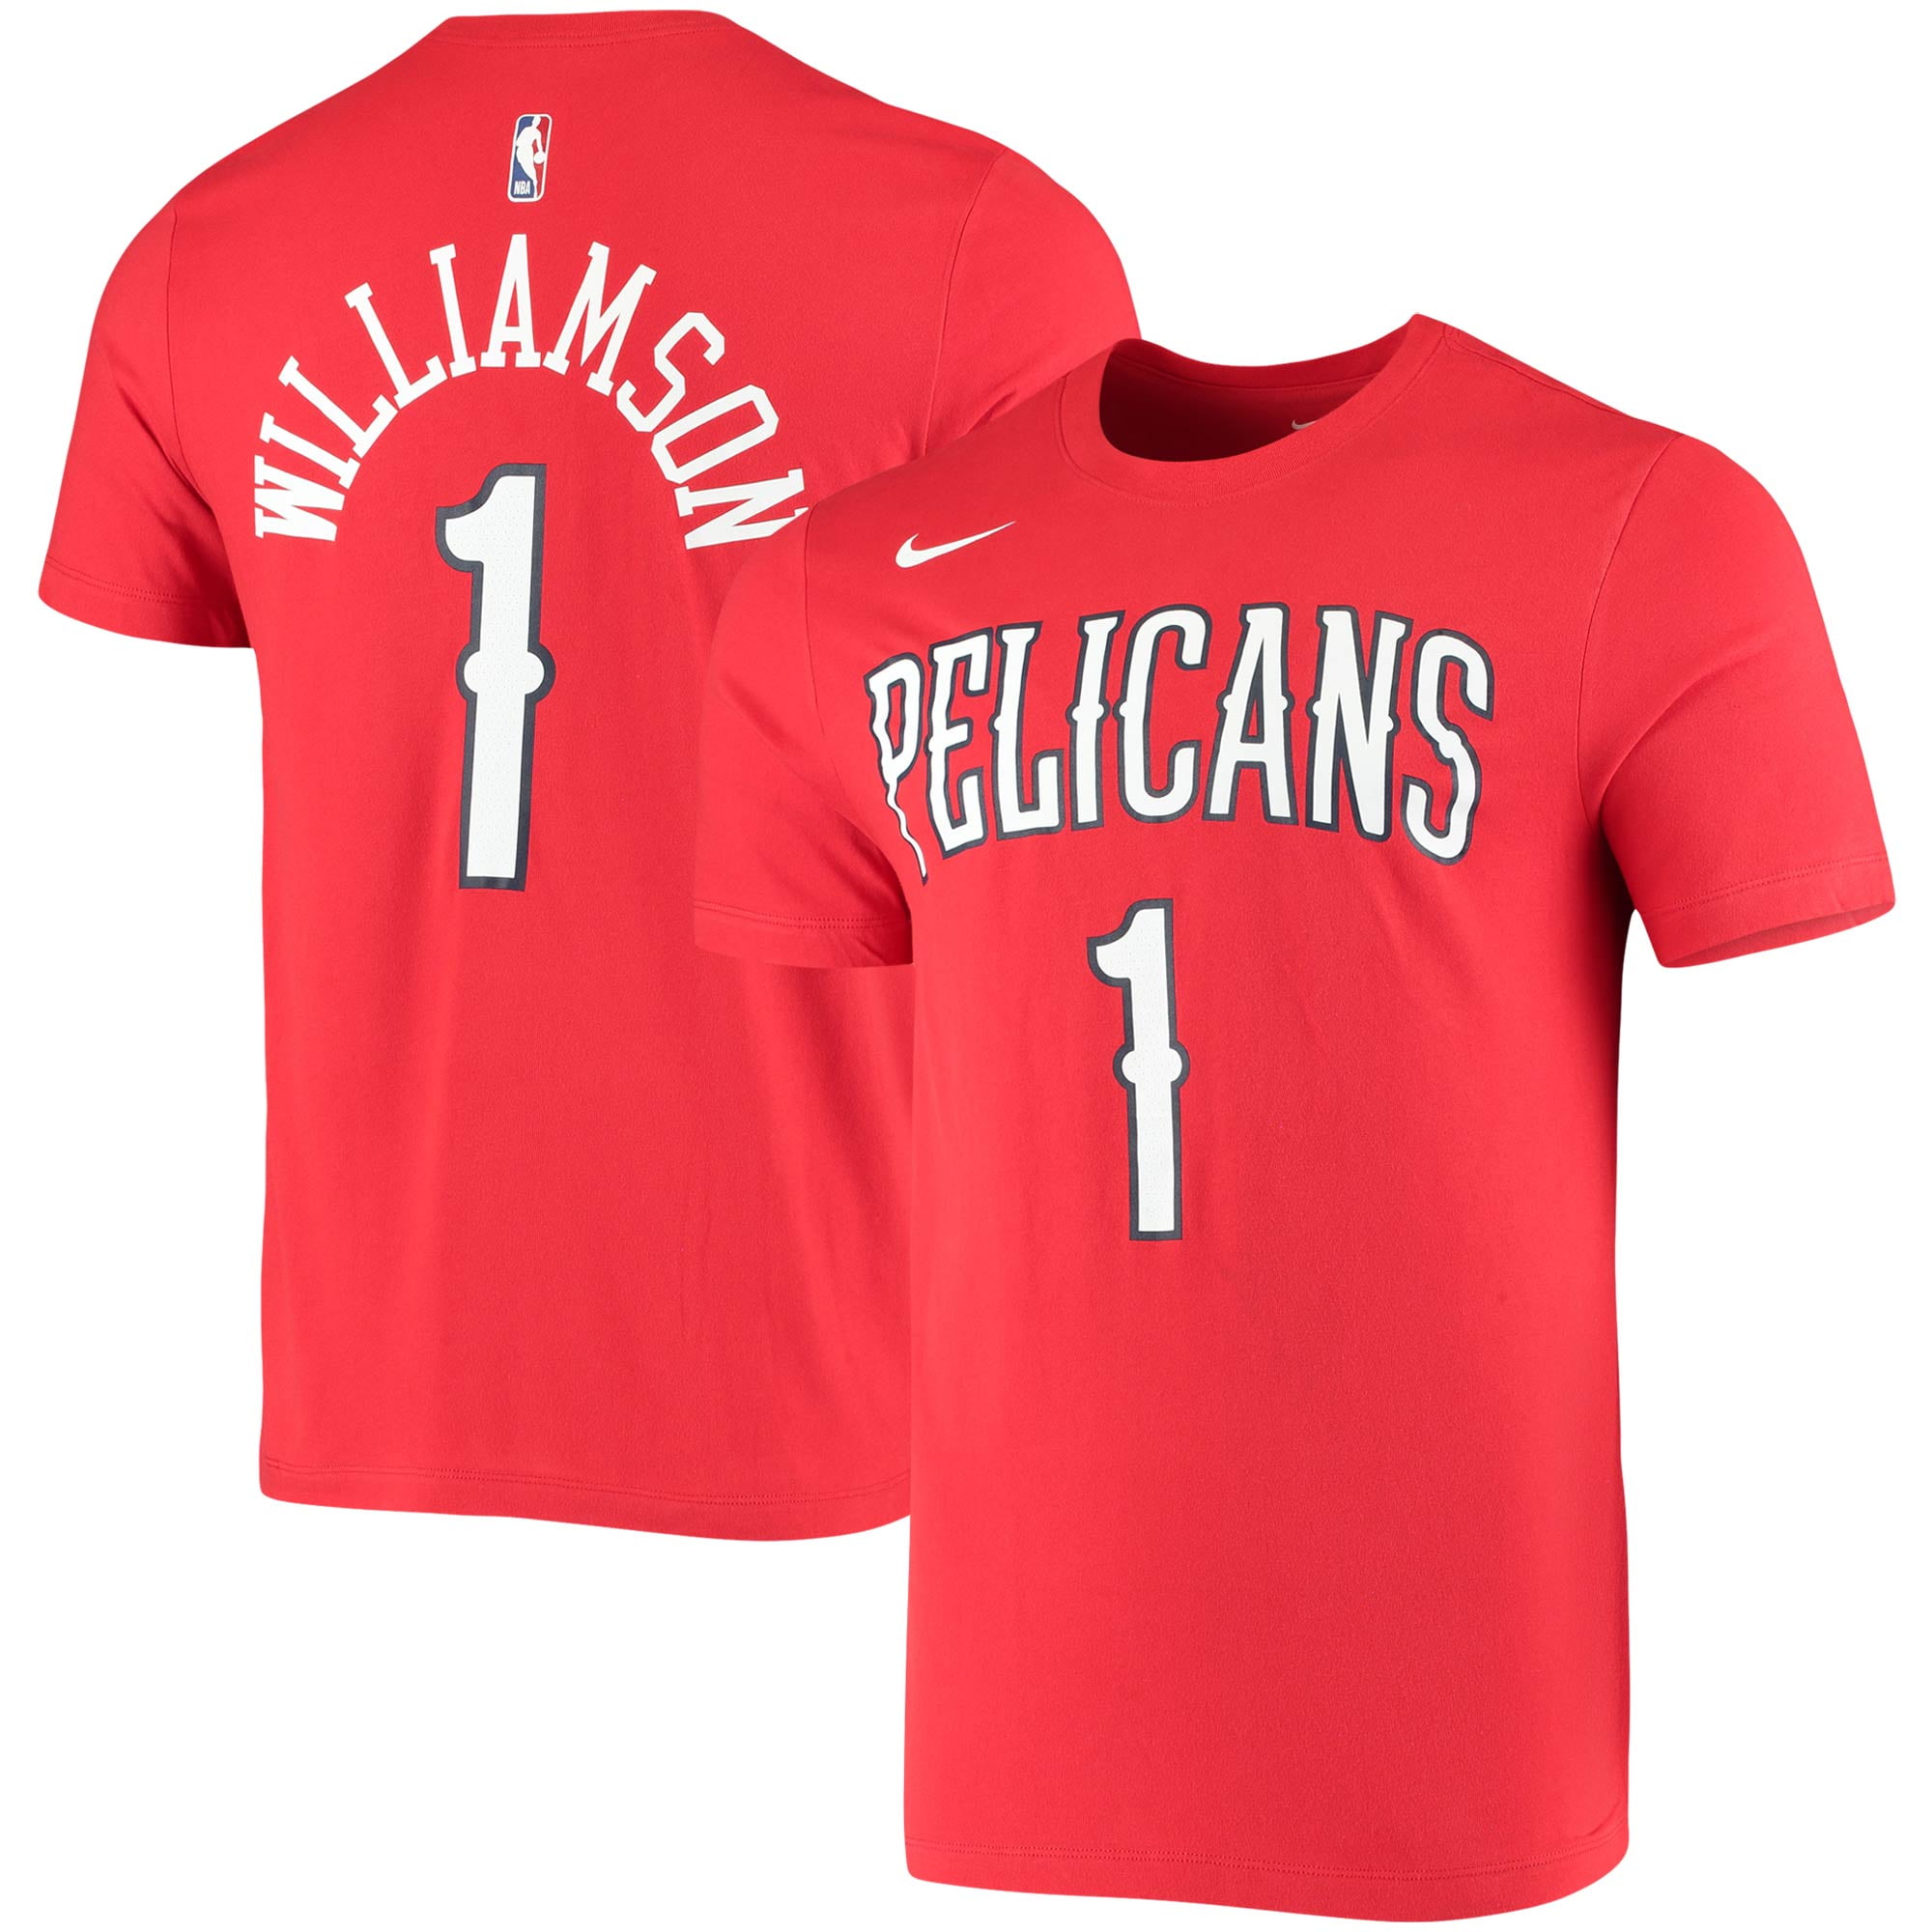 new orleans pelicans red jersey